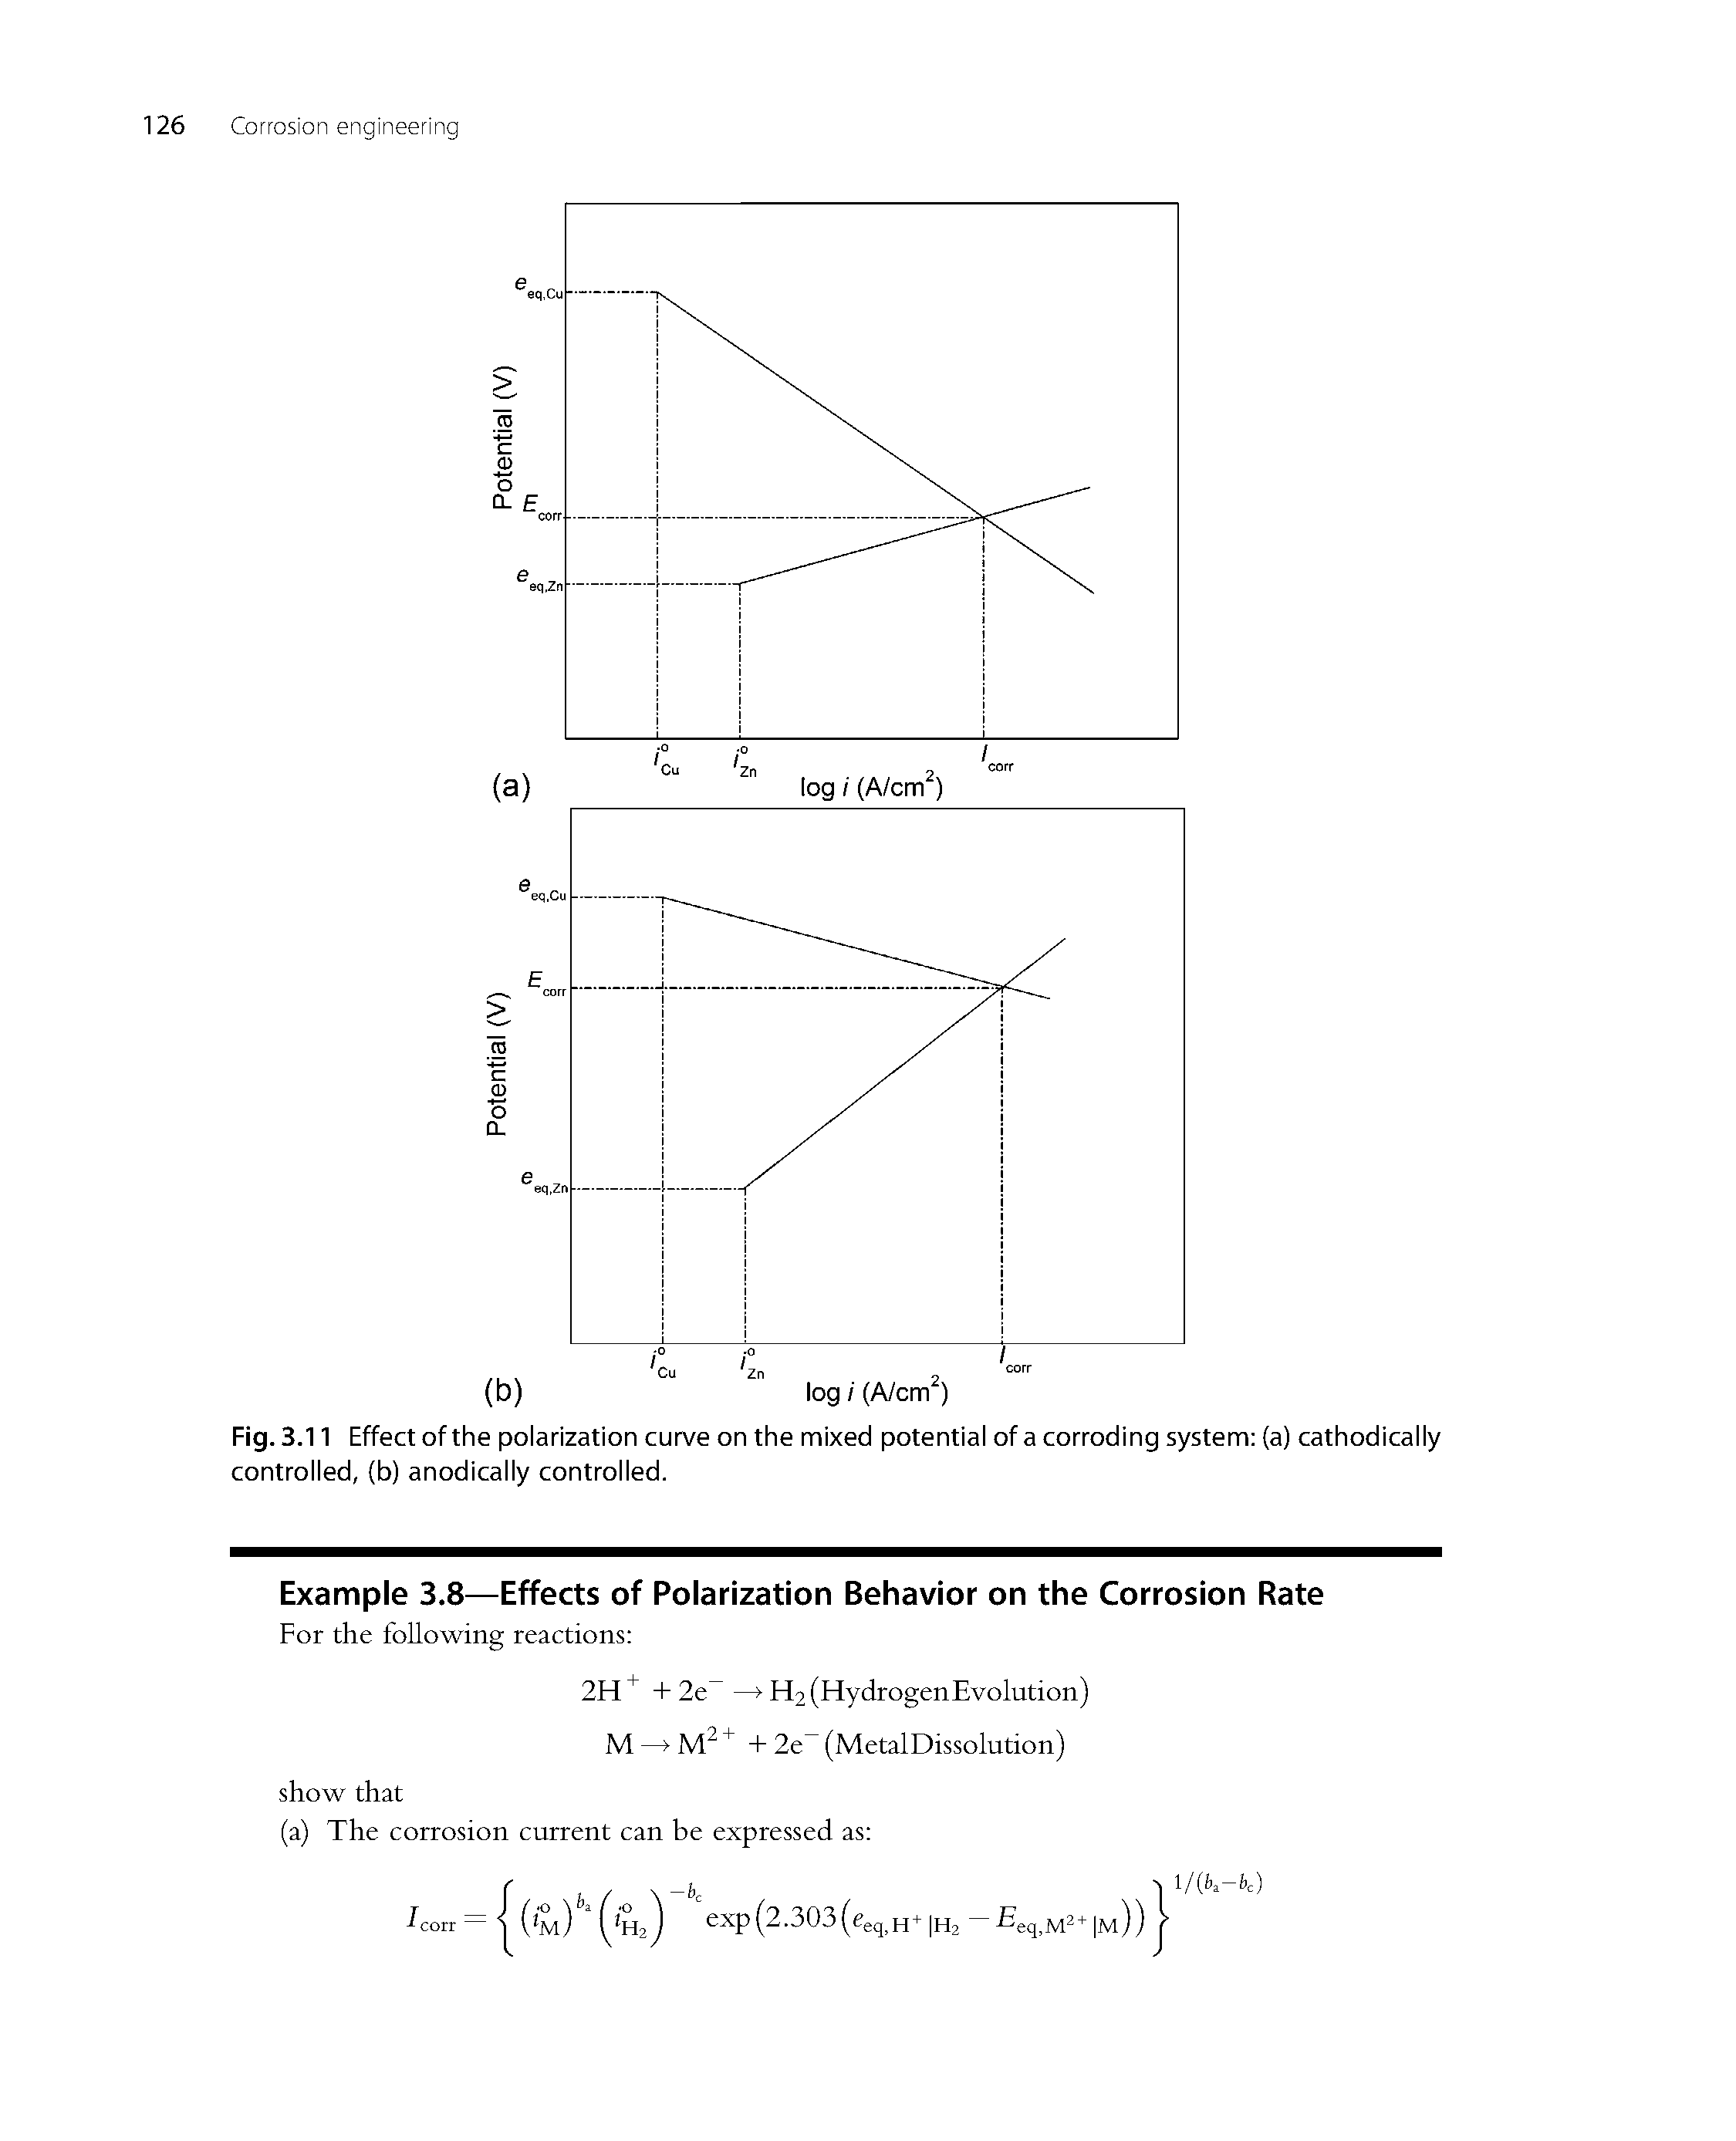 Fig. 3.11 Effect of the polarization curve on the mixed potential of a corroding system (a) cathodically controlled, (b) anodically controlled.